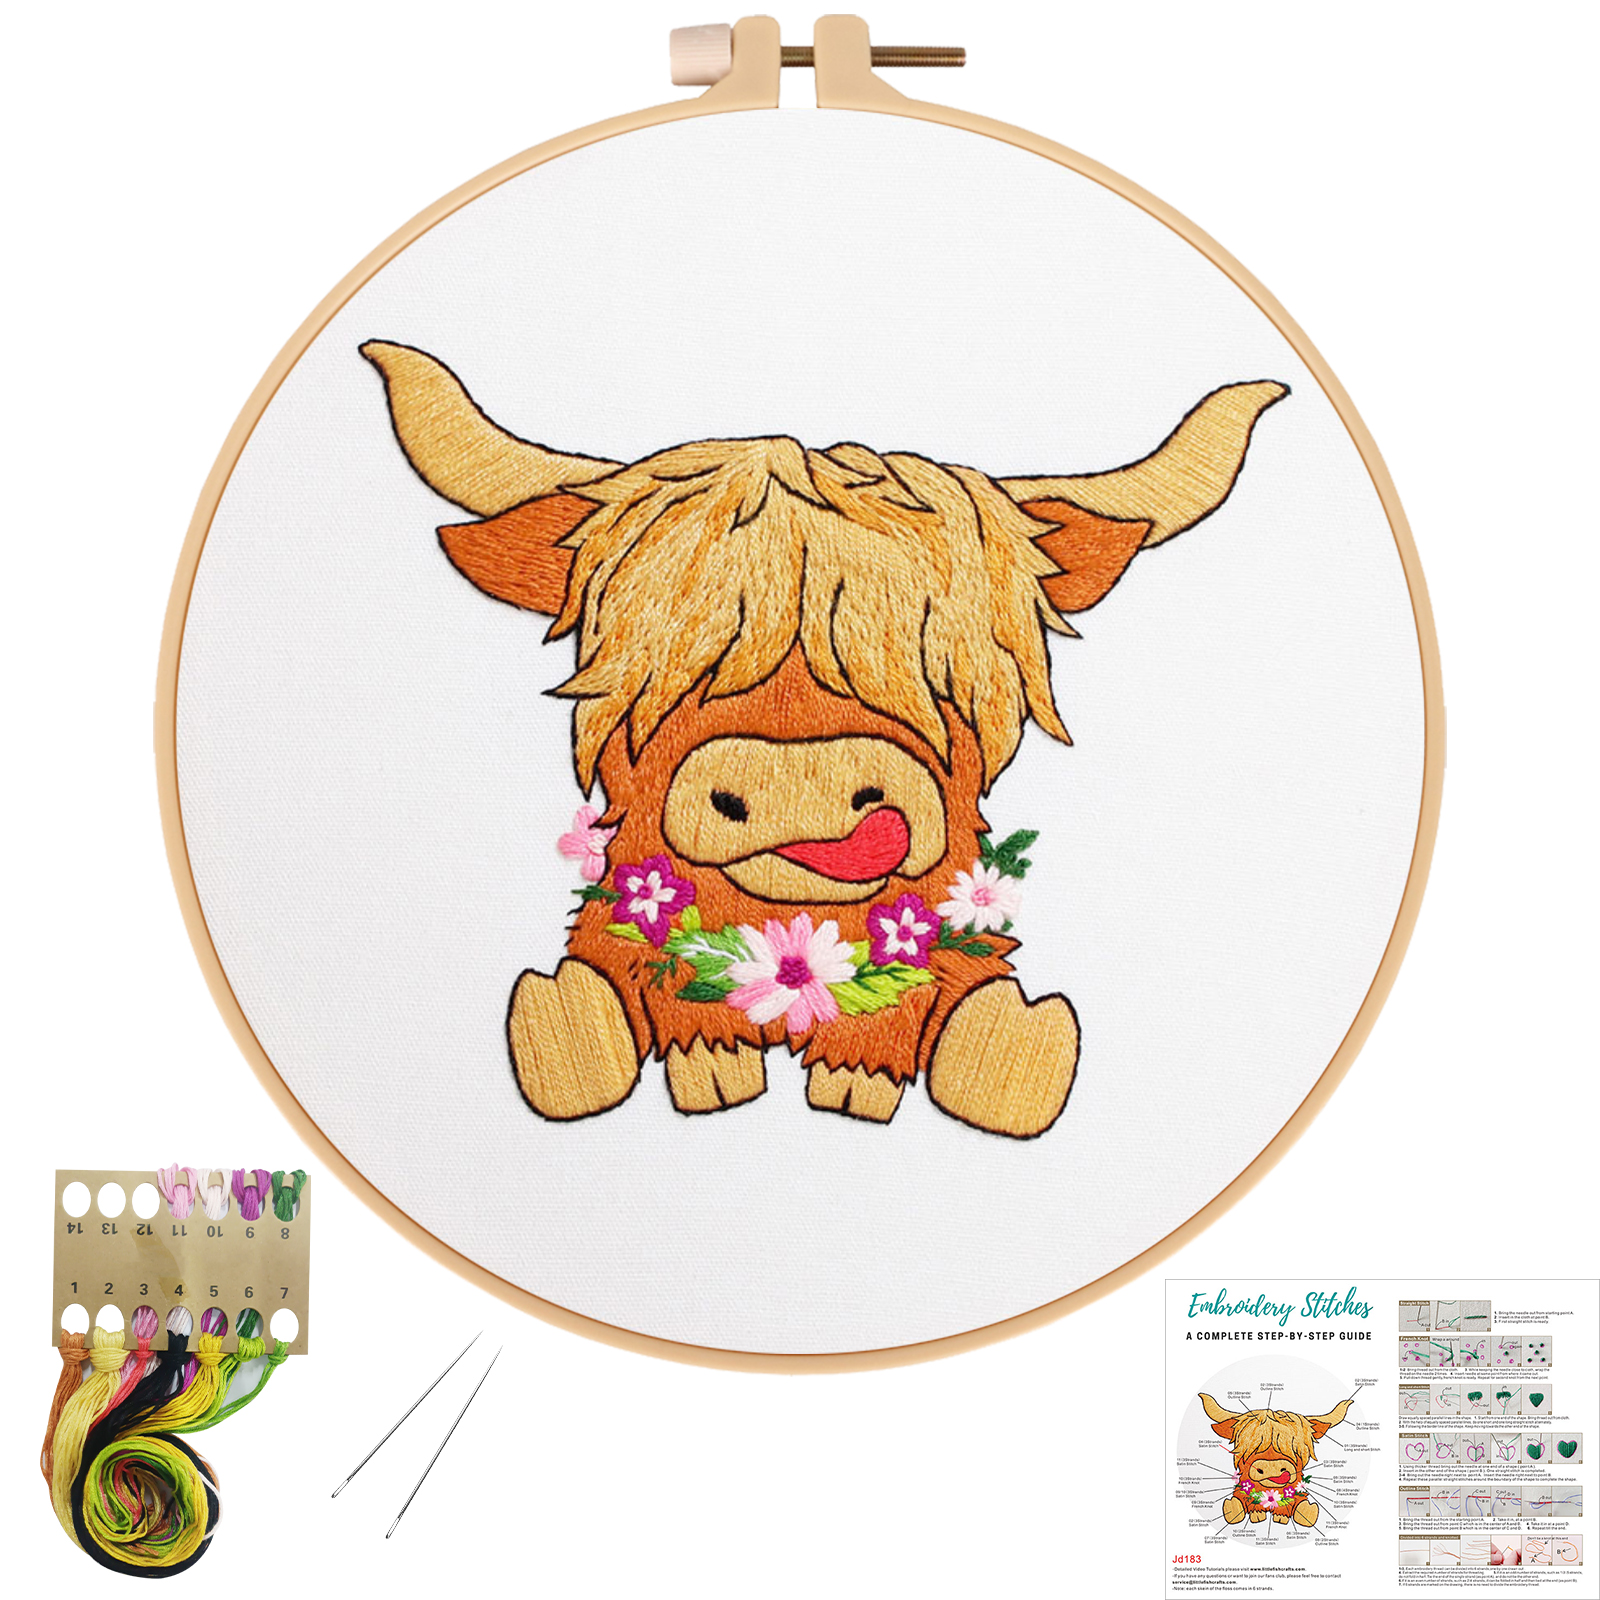 Embroidery Starter Kit Cross stitch kit for Adult Beginner -Highland Cow pattern